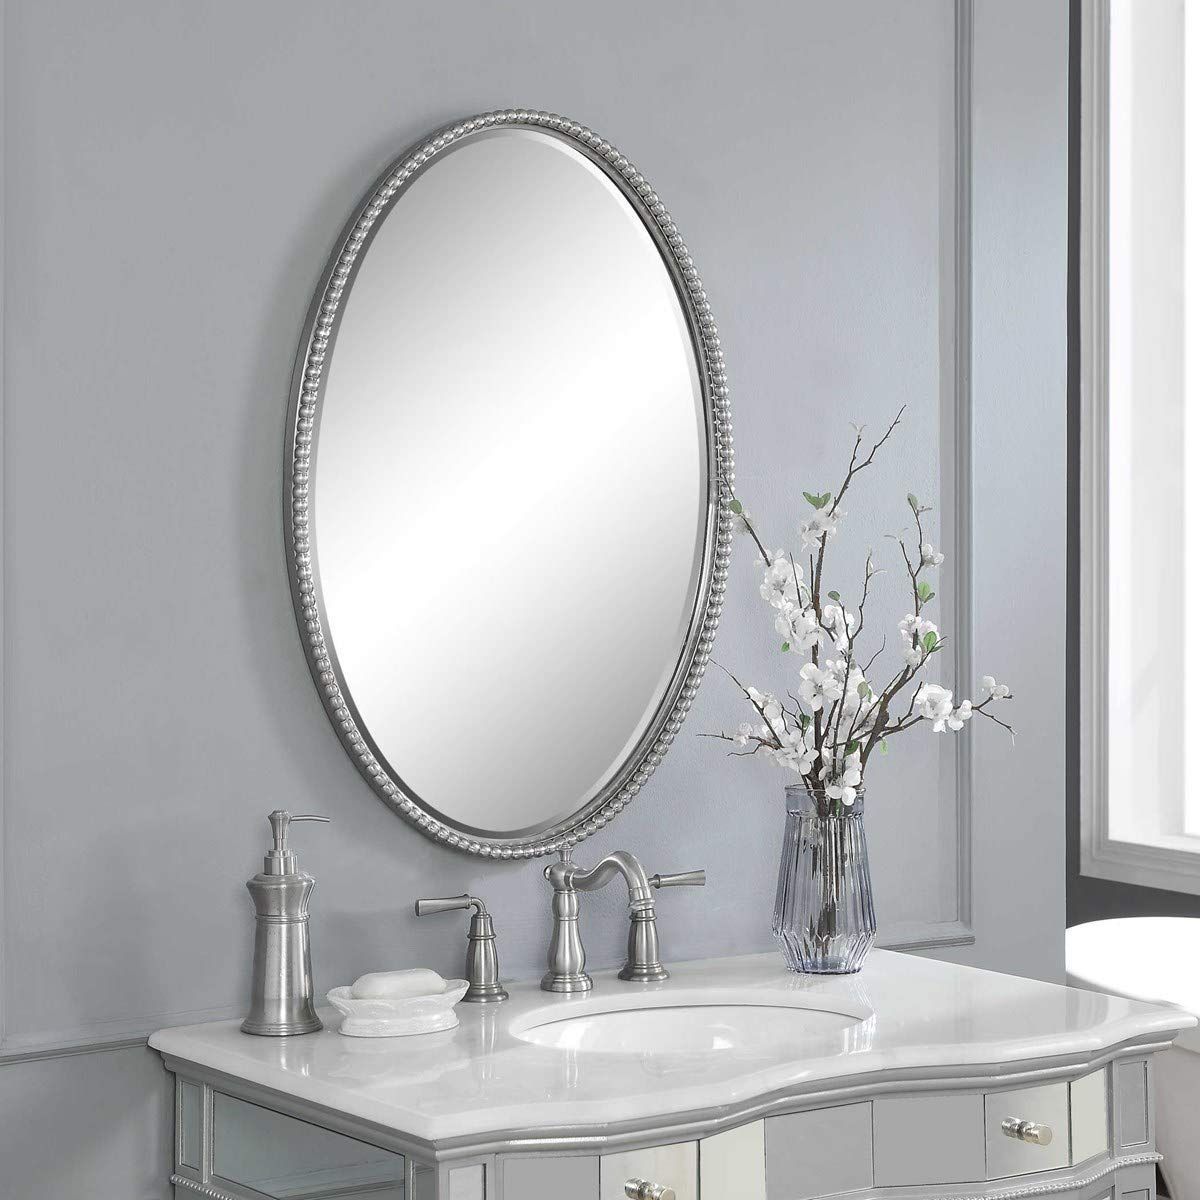 Uttermost' 01102 Sherise Oval Brushed Nickel Beaded Wall Mirror Intended For Nickel Framed Oval Wall Mirrors (View 10 of 15)